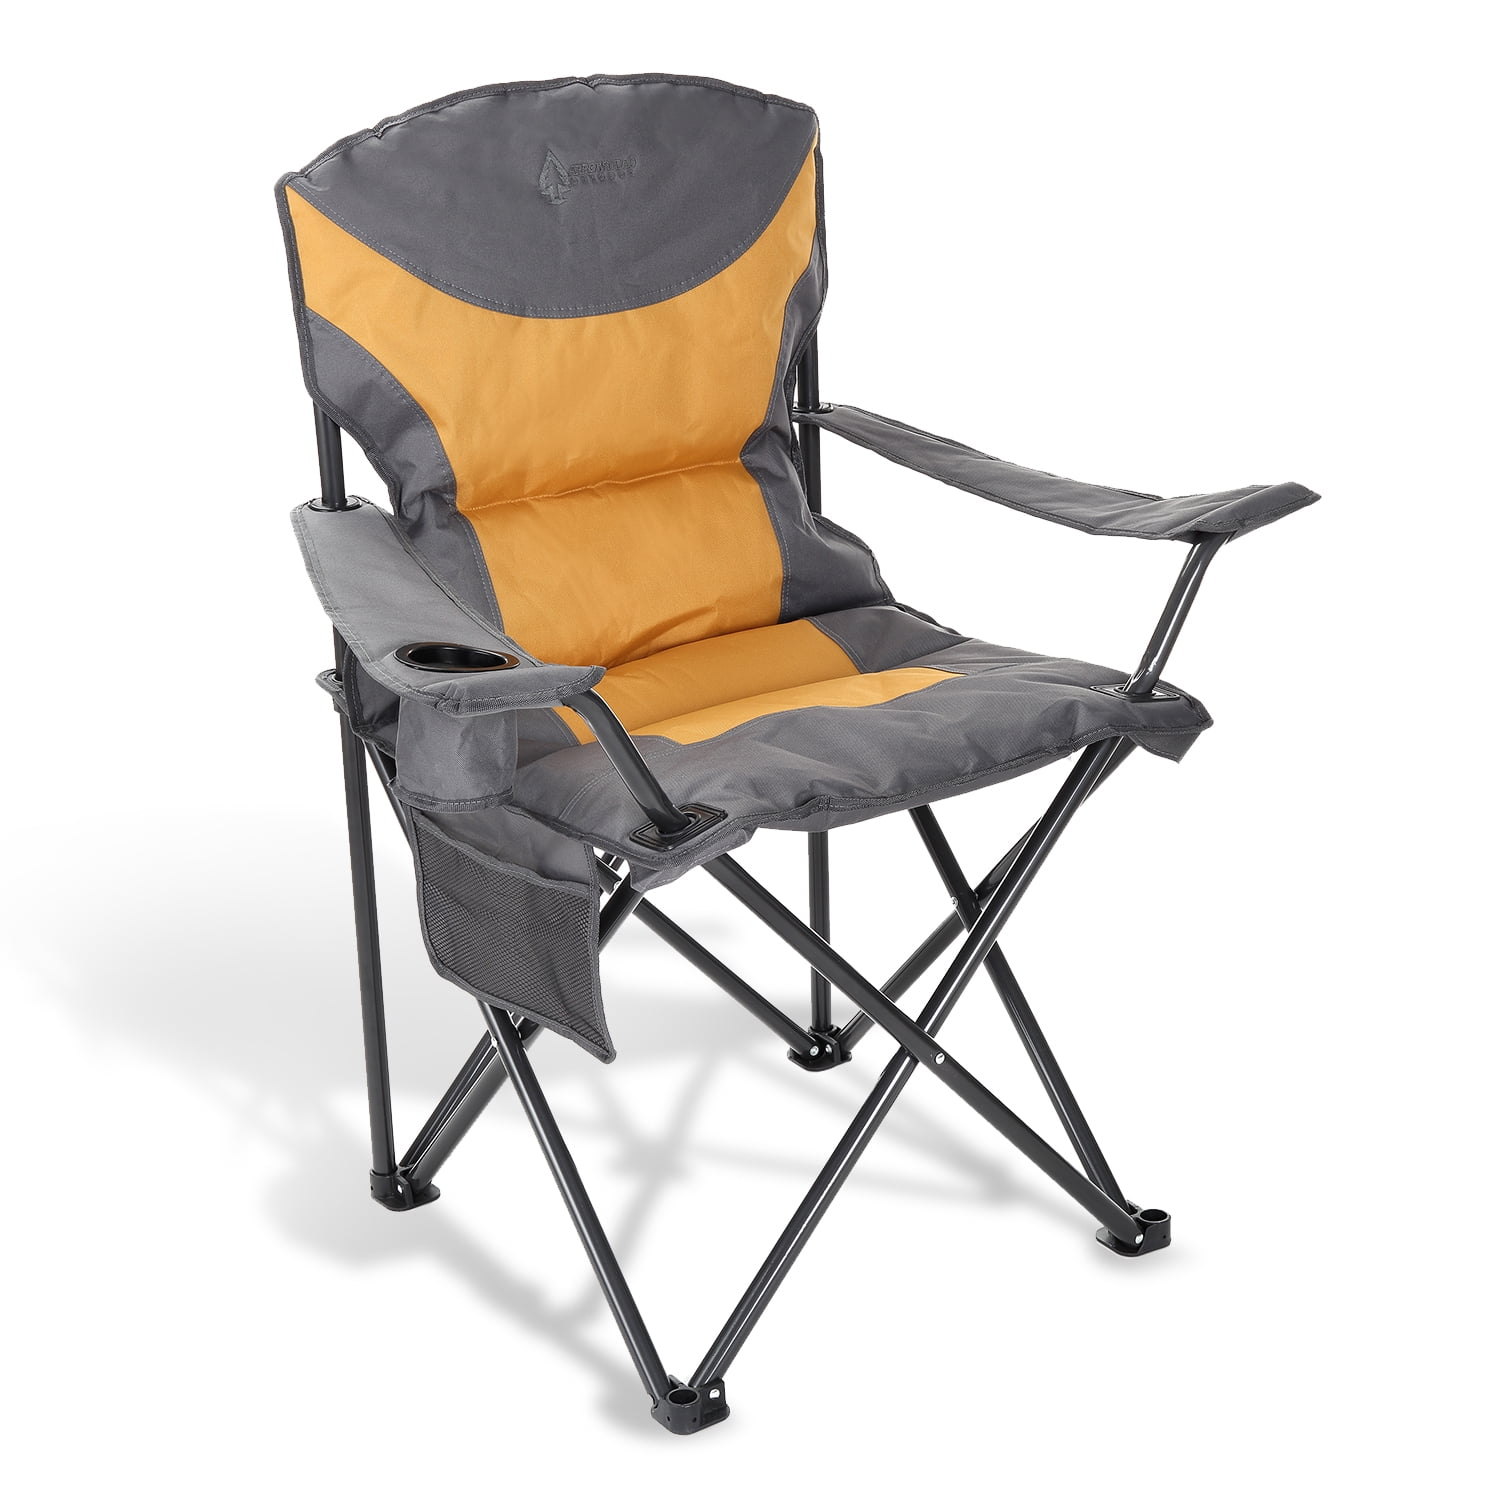 Portable Oversized Cushioned Loveseat Quad Folding Camping Chair Heavy Duty Gray 